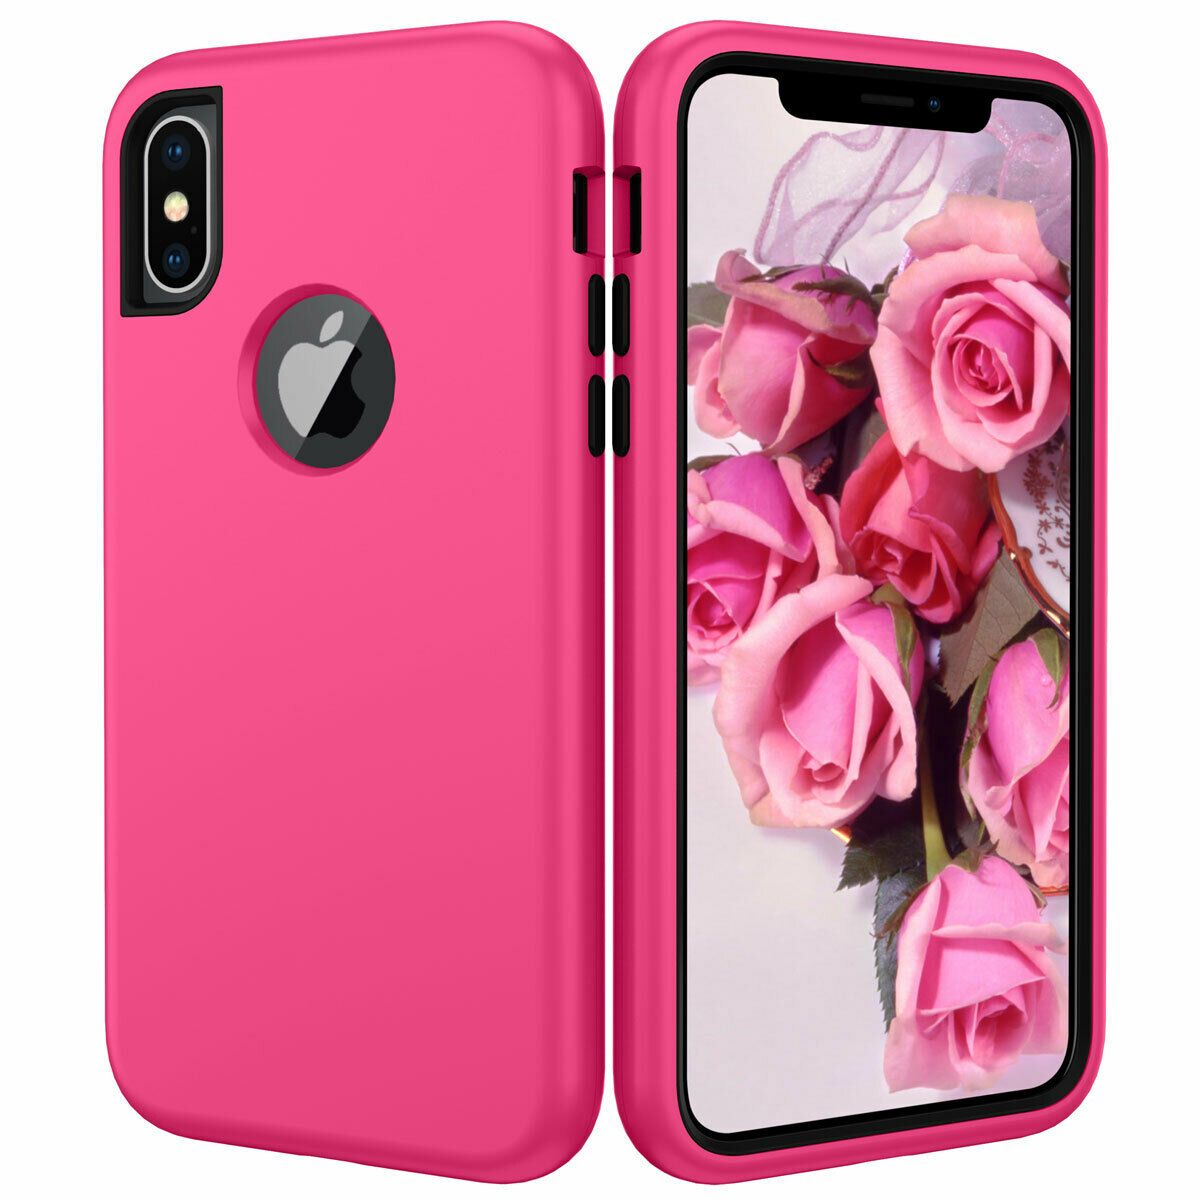 Case For iPhone X Xr XS Max 6 7 8 Plus Shockproof 360 Full Body Cover Protective detsarah Rose For iPhone Xs Max 